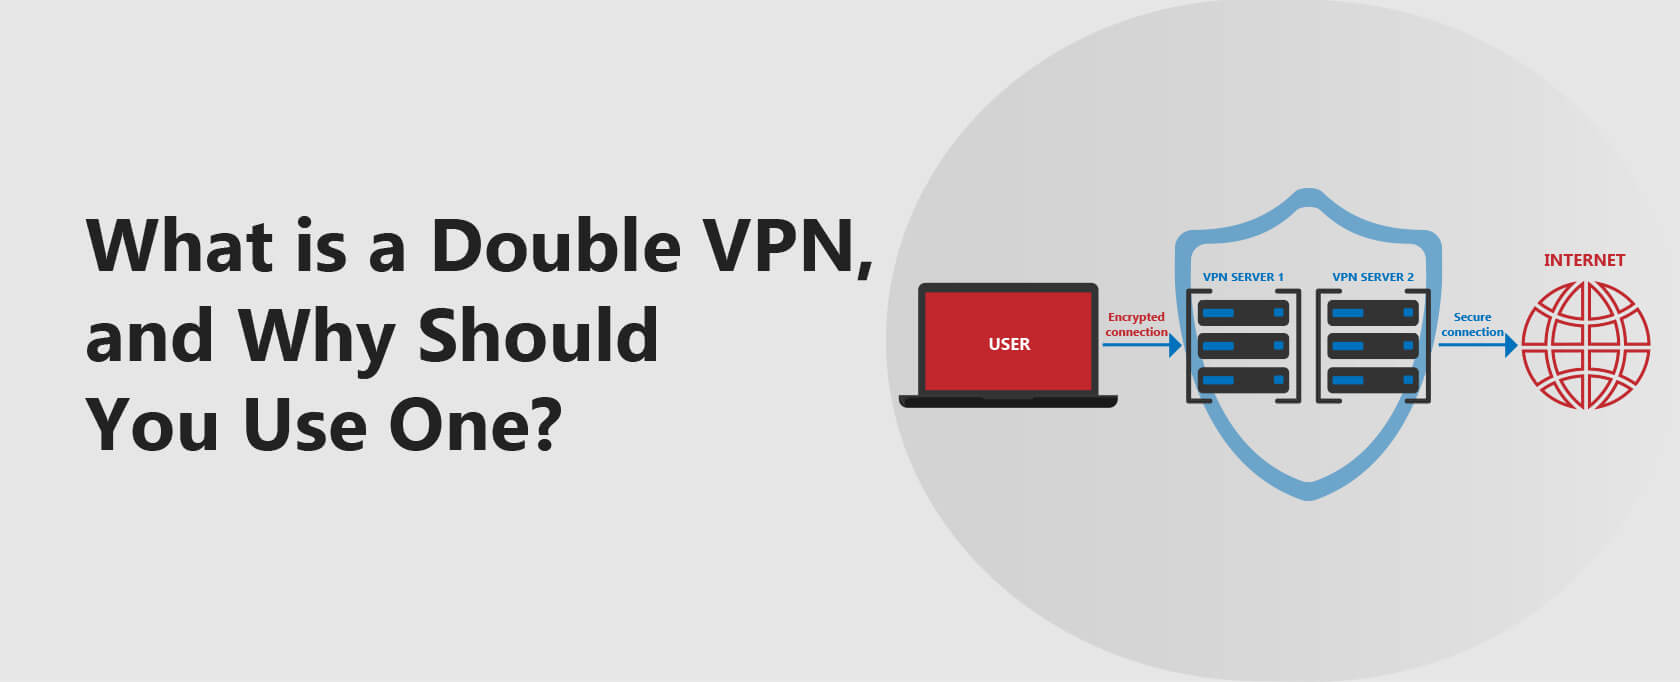 What is a Double VPN, and Why Should You Use One?